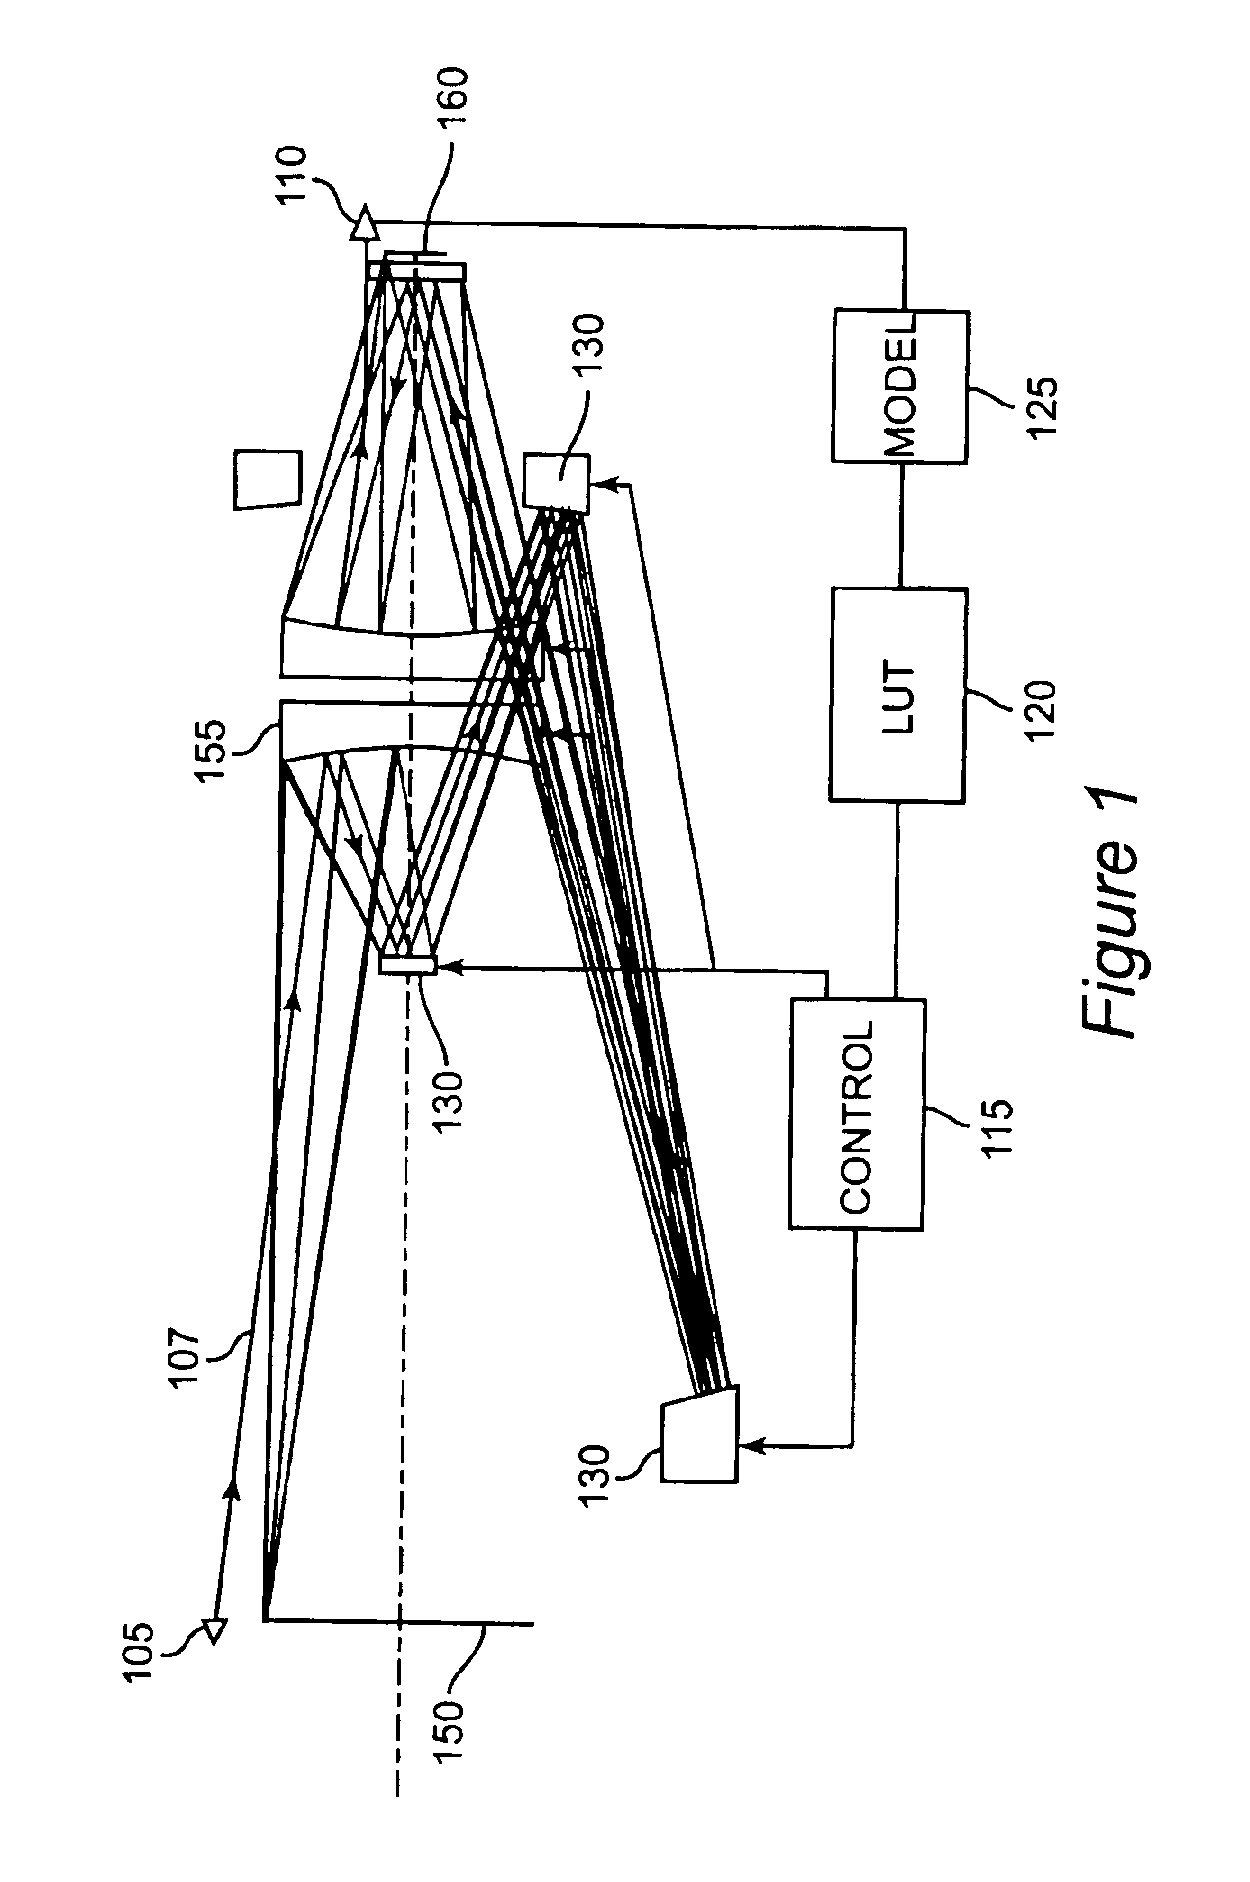 Adaptive optic with discrete actuators for continuous deformation of a deformable mirror system